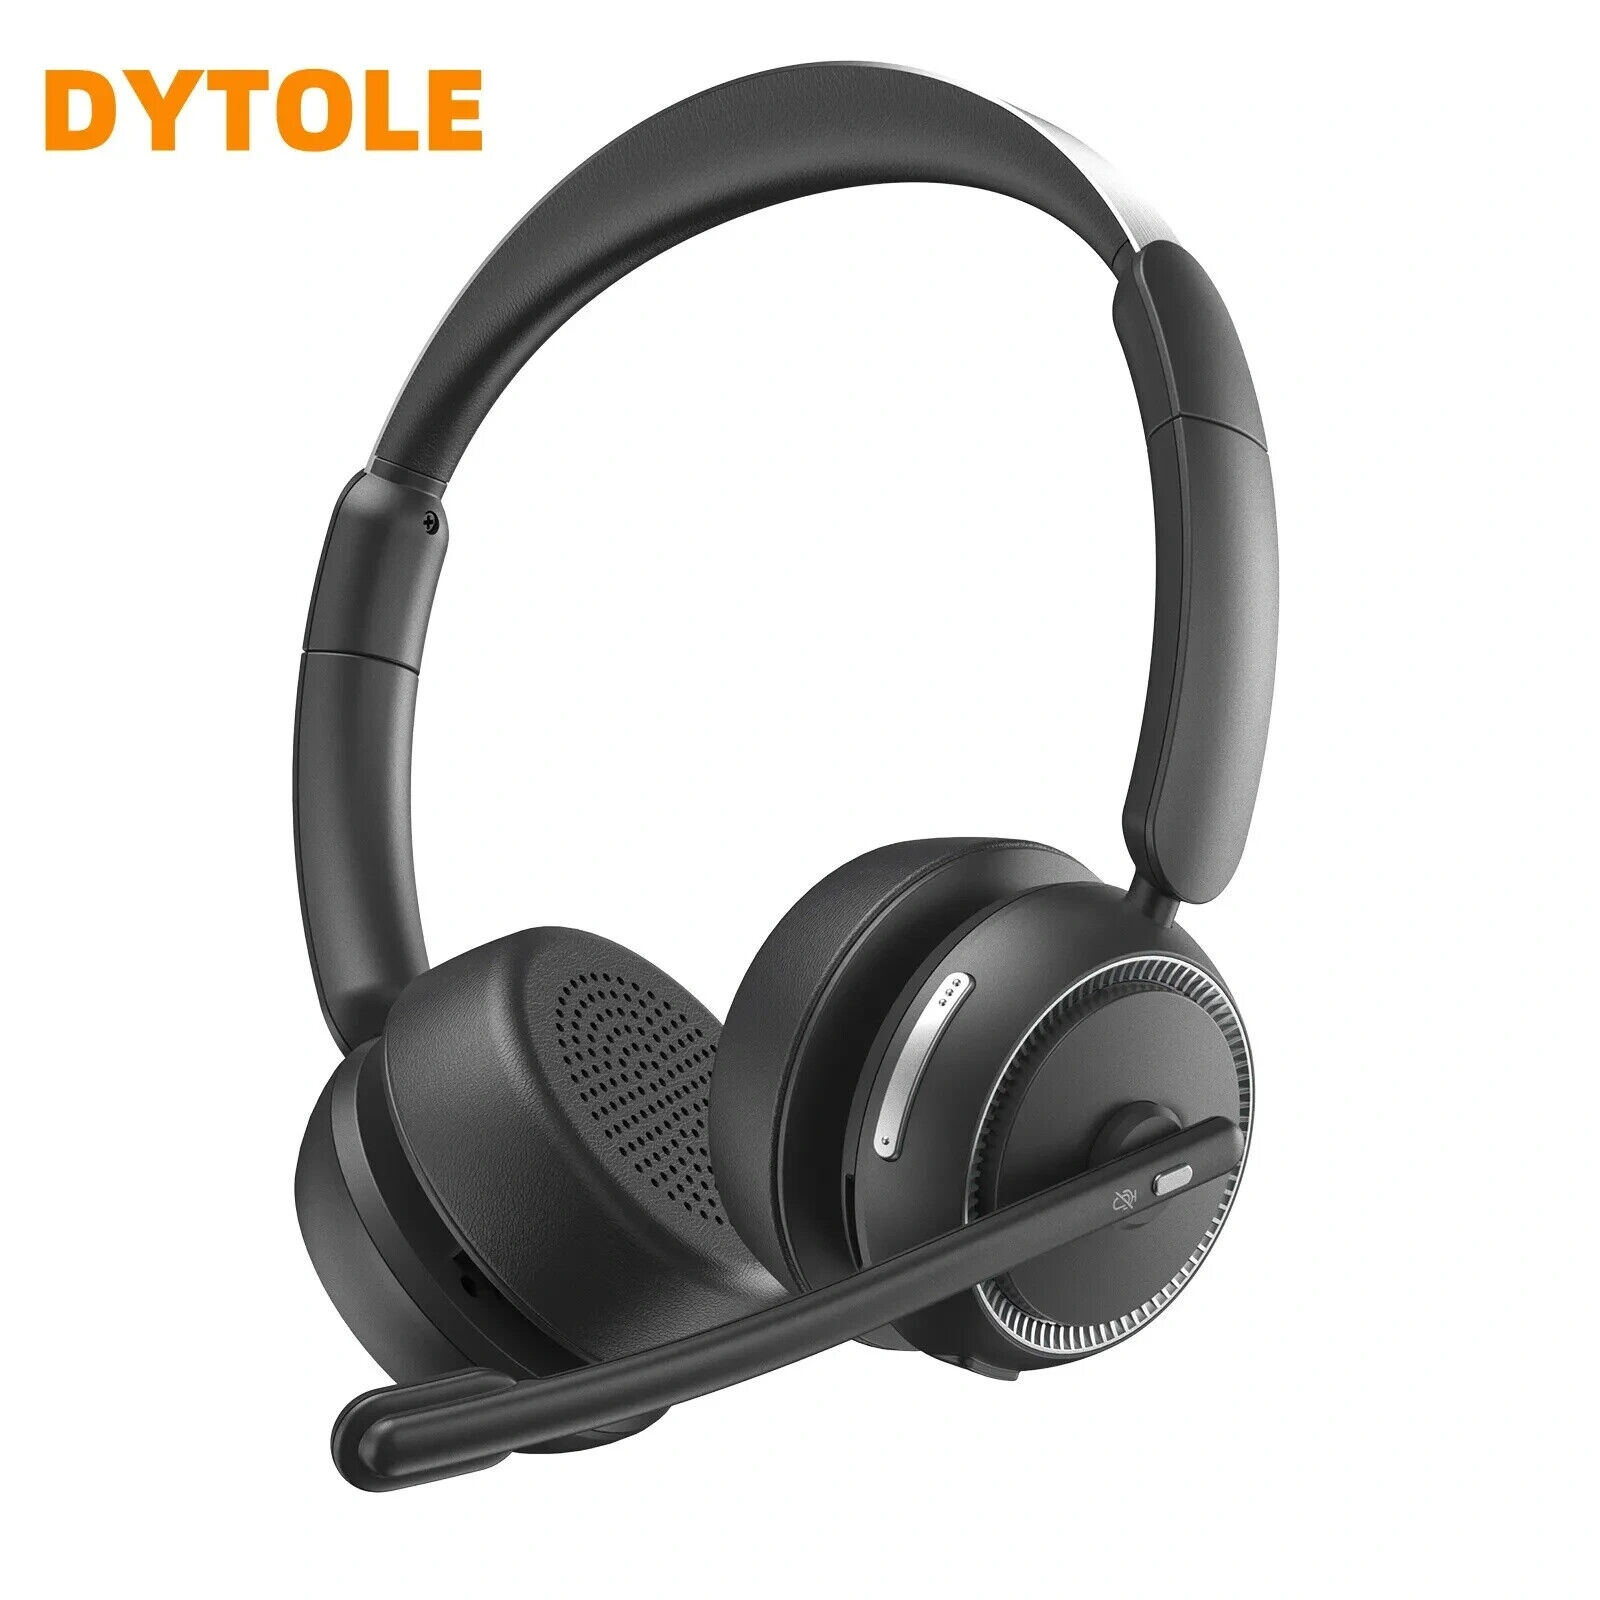 Dytole Wireless Bluetooth Headset With Noise Canceling Mic & HI-FI Stereo Sound